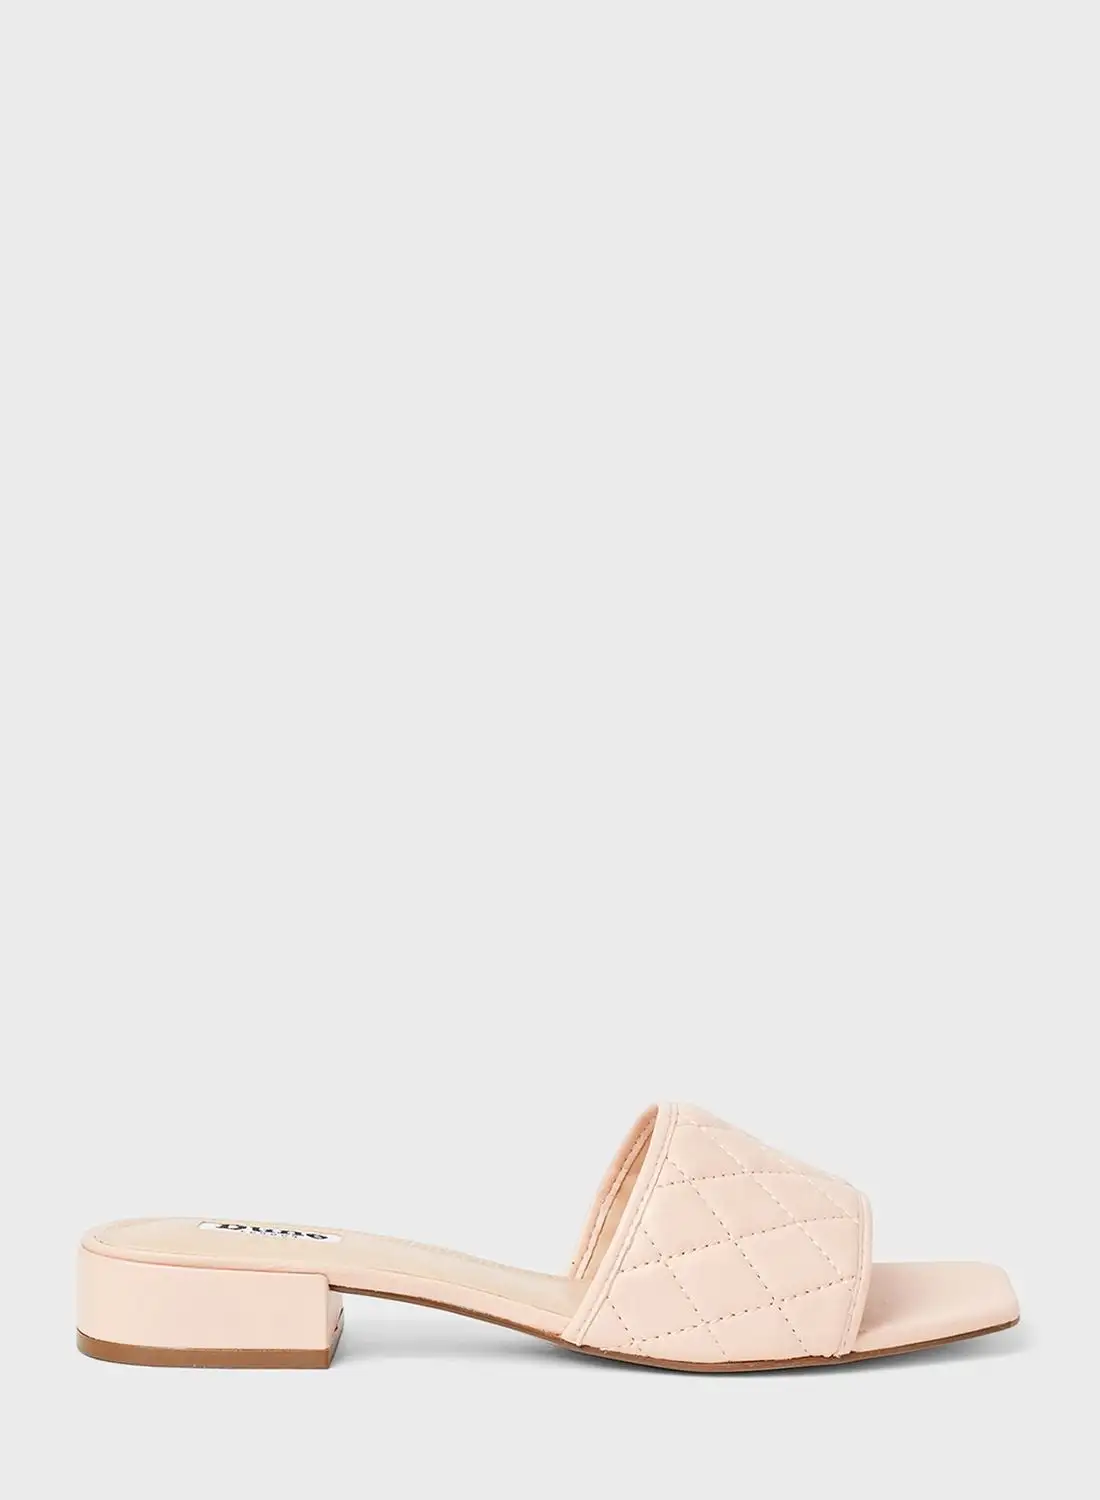 Dune LONDON Linear Di Leather Sandals